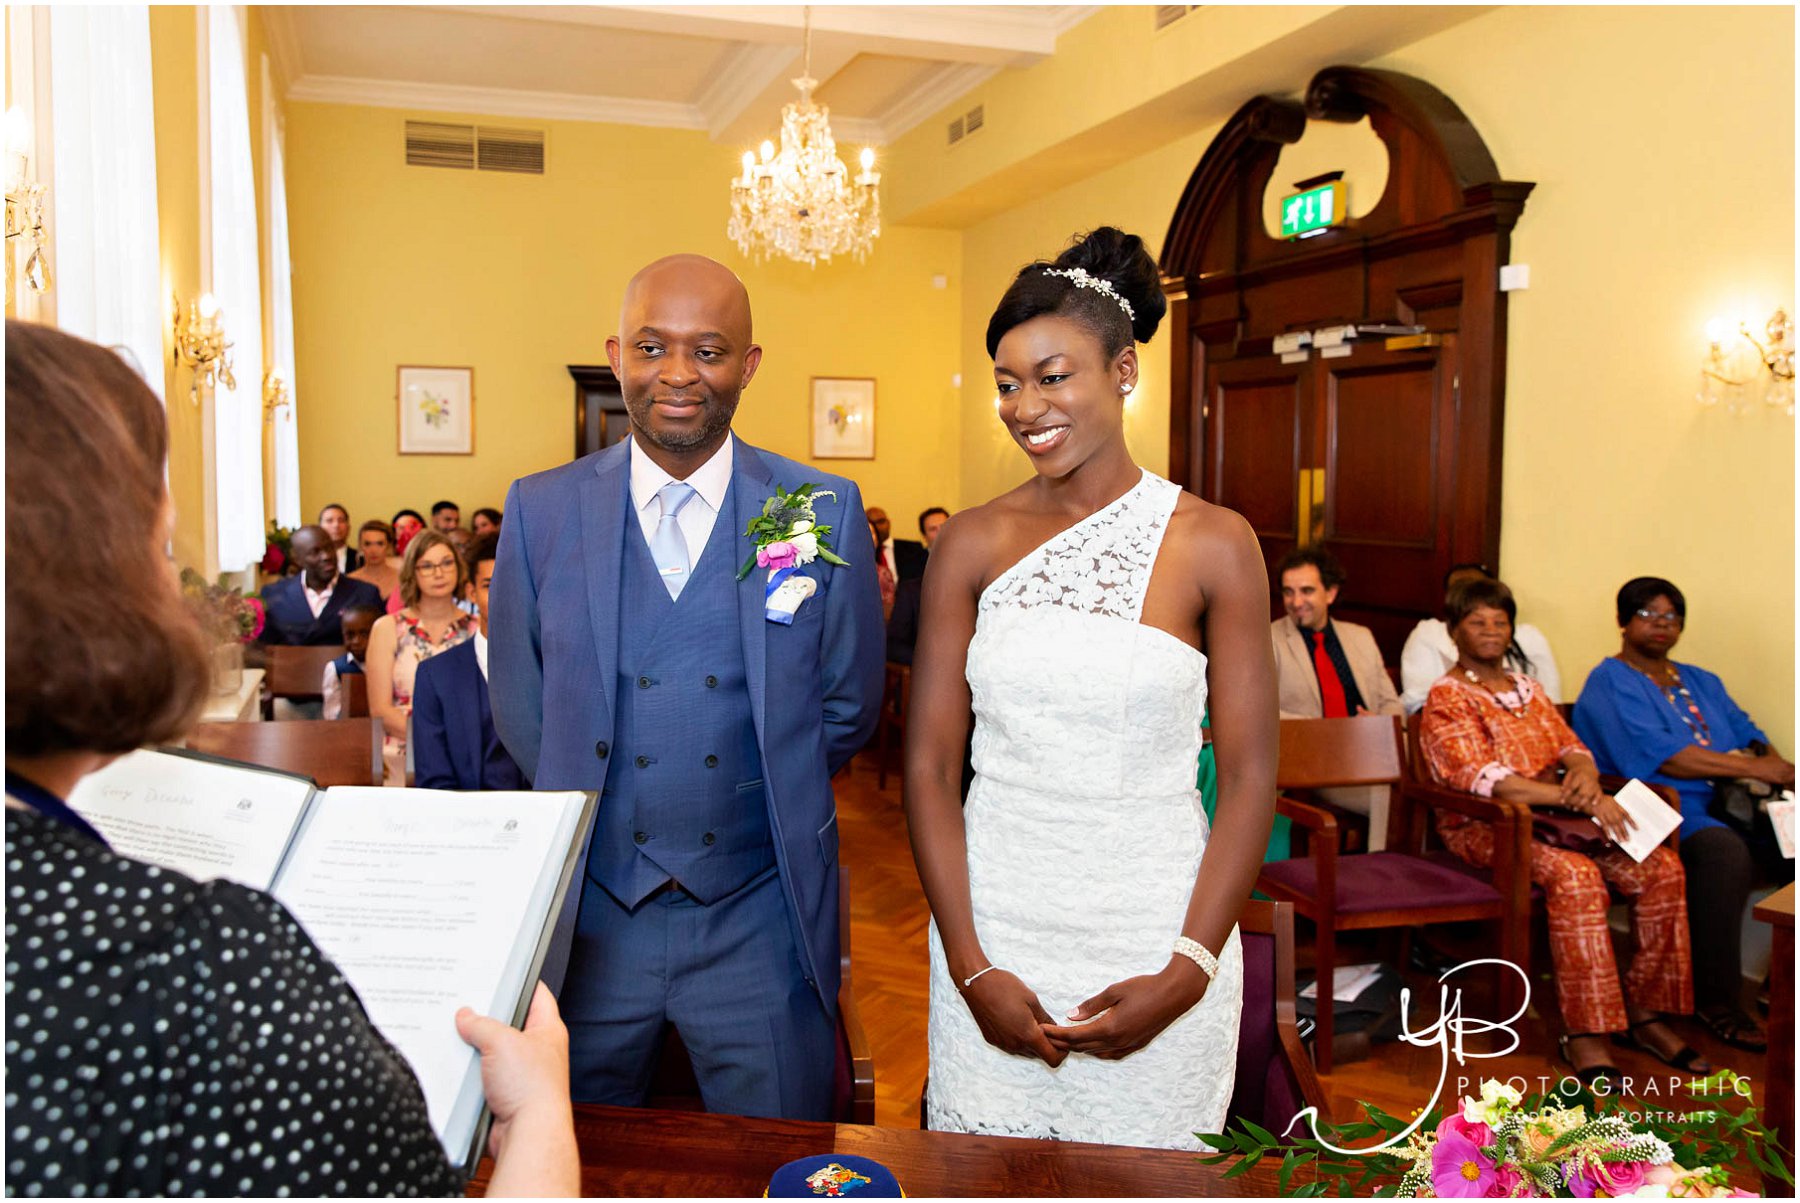 The bride and groom get ready to exchange their marriage vows in the Brydon Room at Chelsea Register Office | ybphotographic